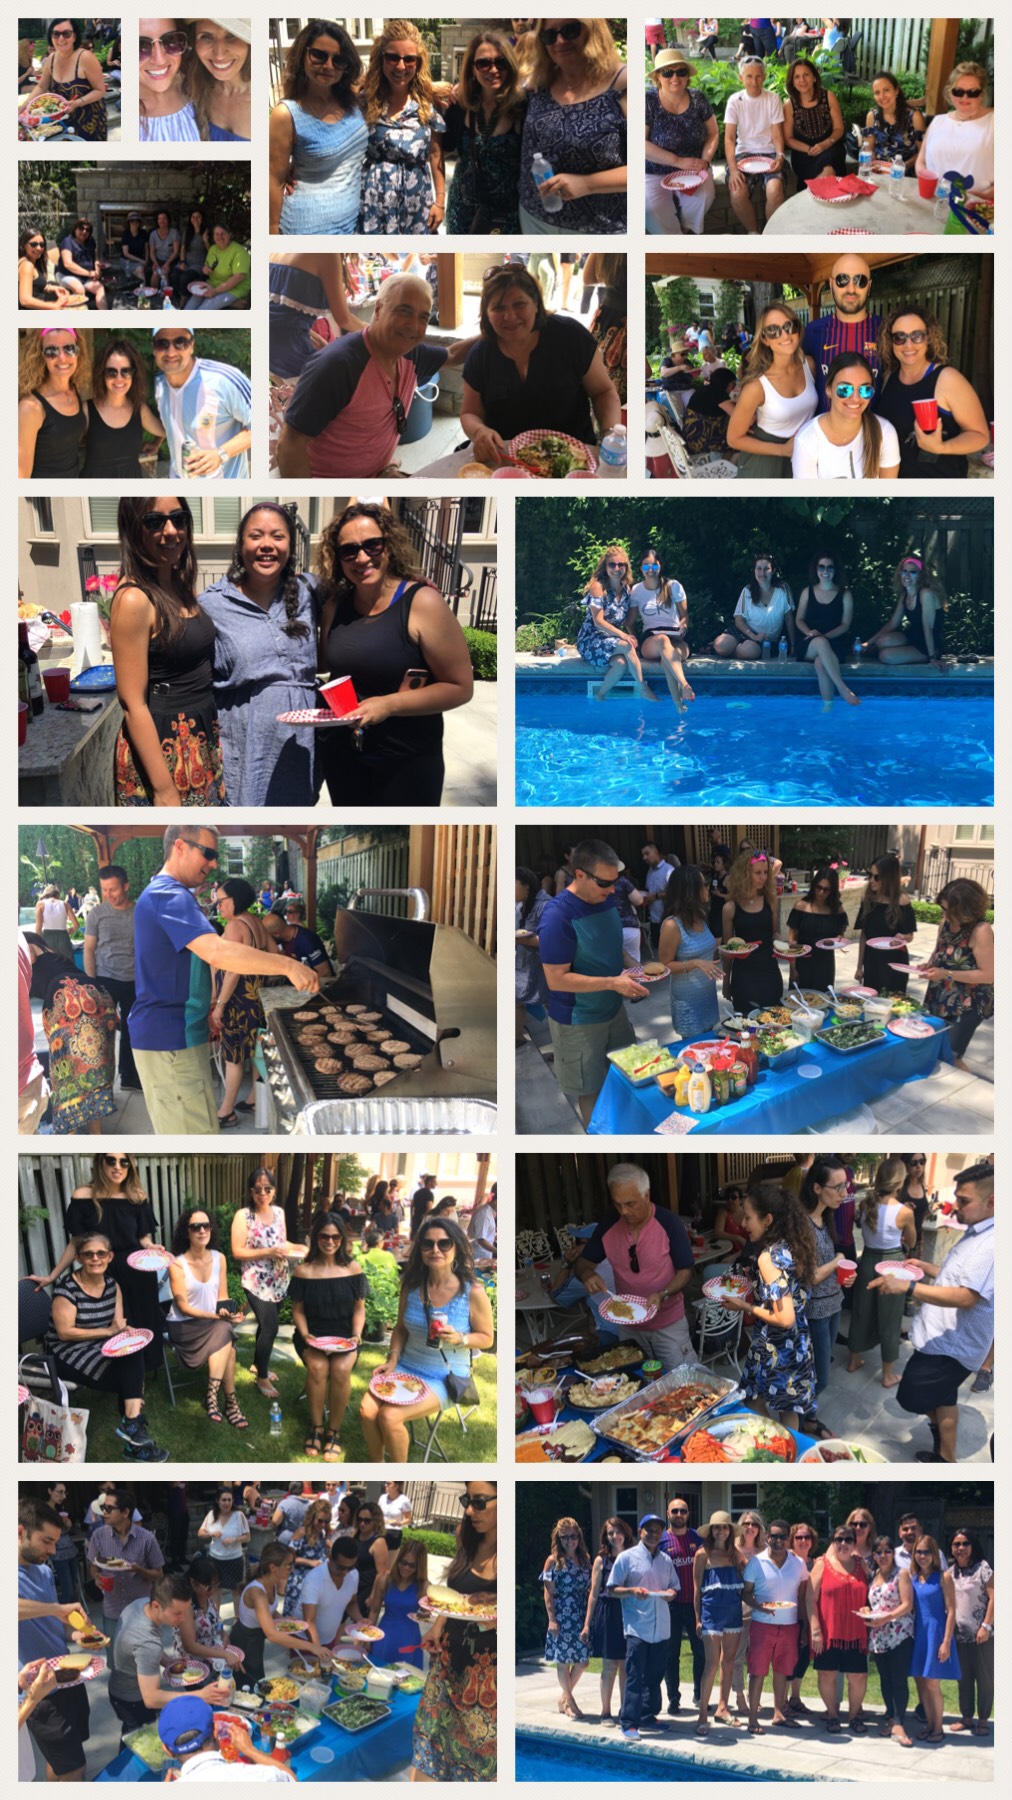 Thank you  for a wonderful school year St. Margaret staff!!  We are blessed for all that you do to nurture academics, inclusivity and well being!  Have a most enjoyable summer, back in September refreshed and recharged. @tcdsb